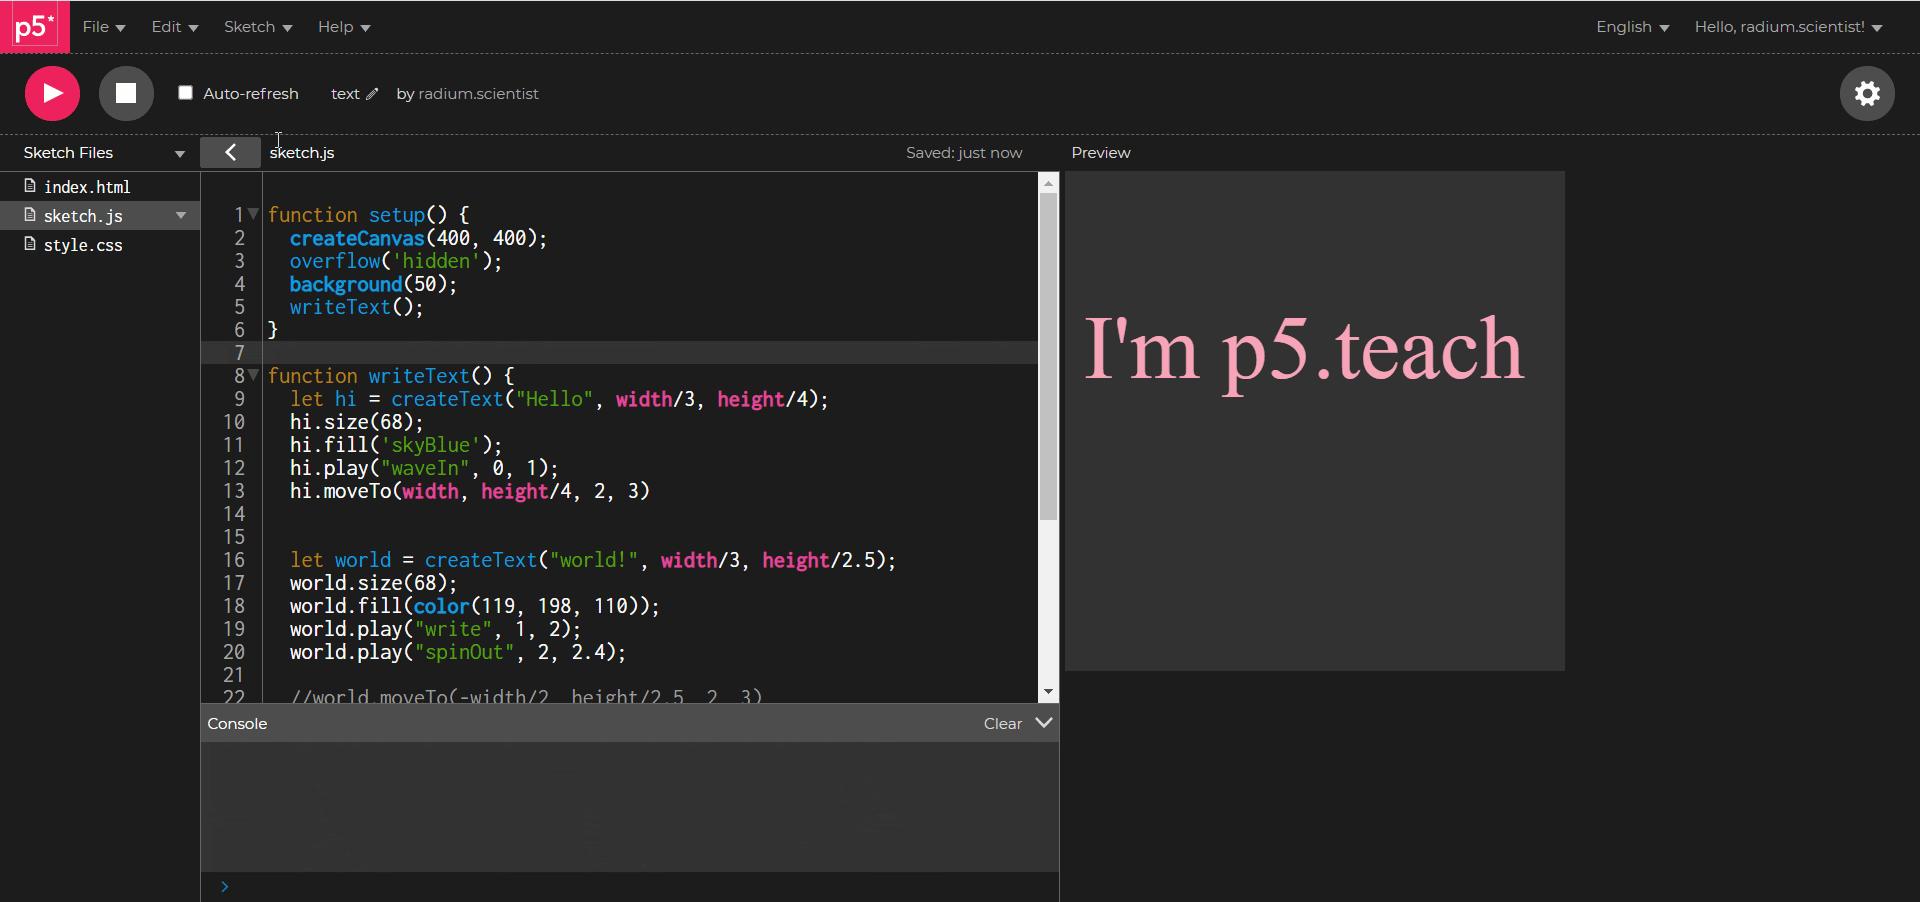 Animated text using p5.teach in p5.js web editor. On the left half of the screen is the p5.js code, and on the right is the rendering of the sketch, containing “Hello world!” text appearing then disappearing followed by typing and zooming effect on another sentence that is “I’m p5.teach.”